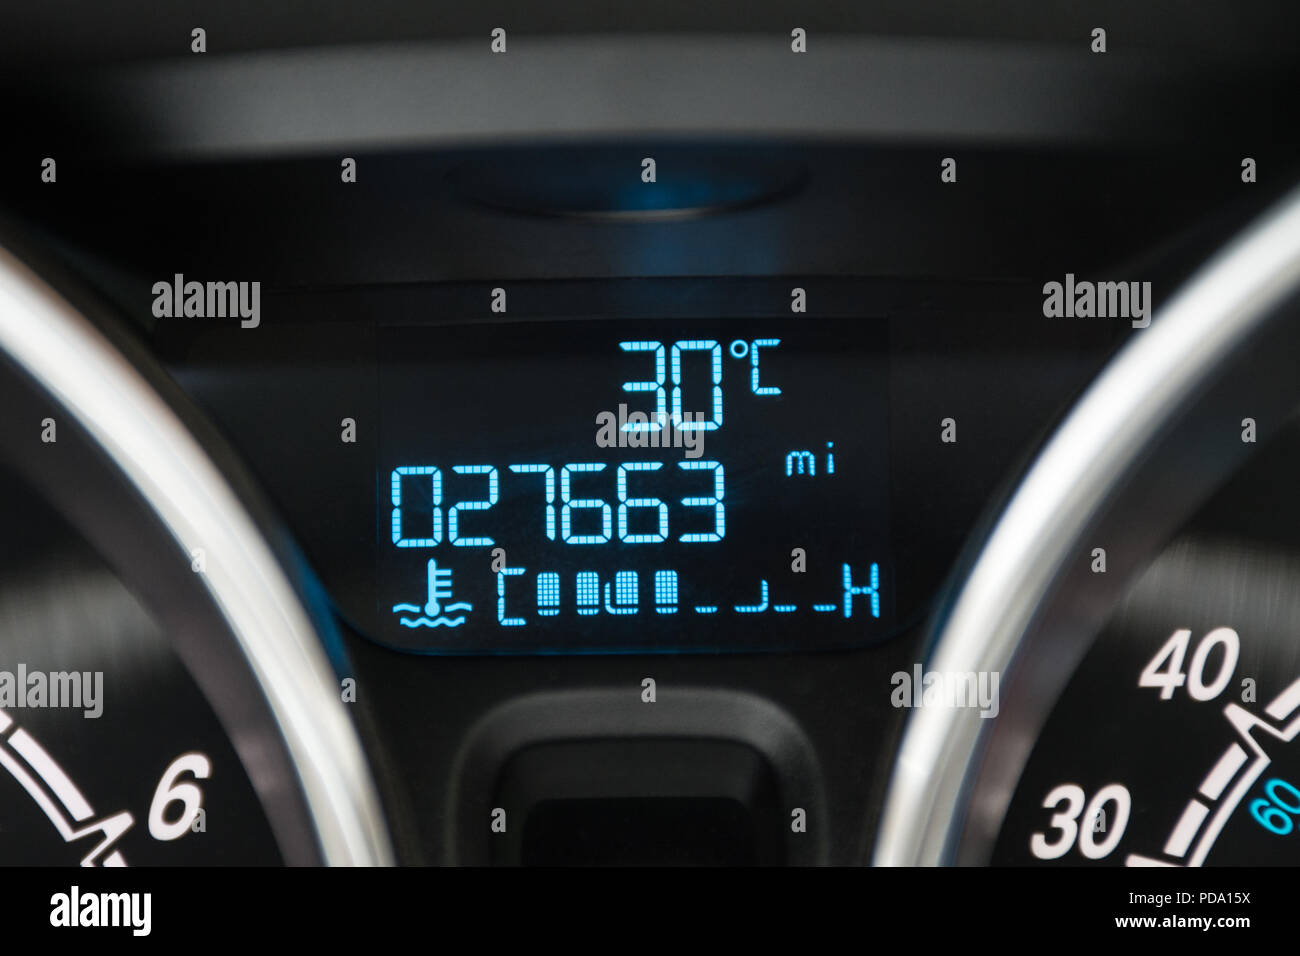 Temperature reading 30 degrees centigrade during august 2018 heatwave on car dashboard Stock Photo